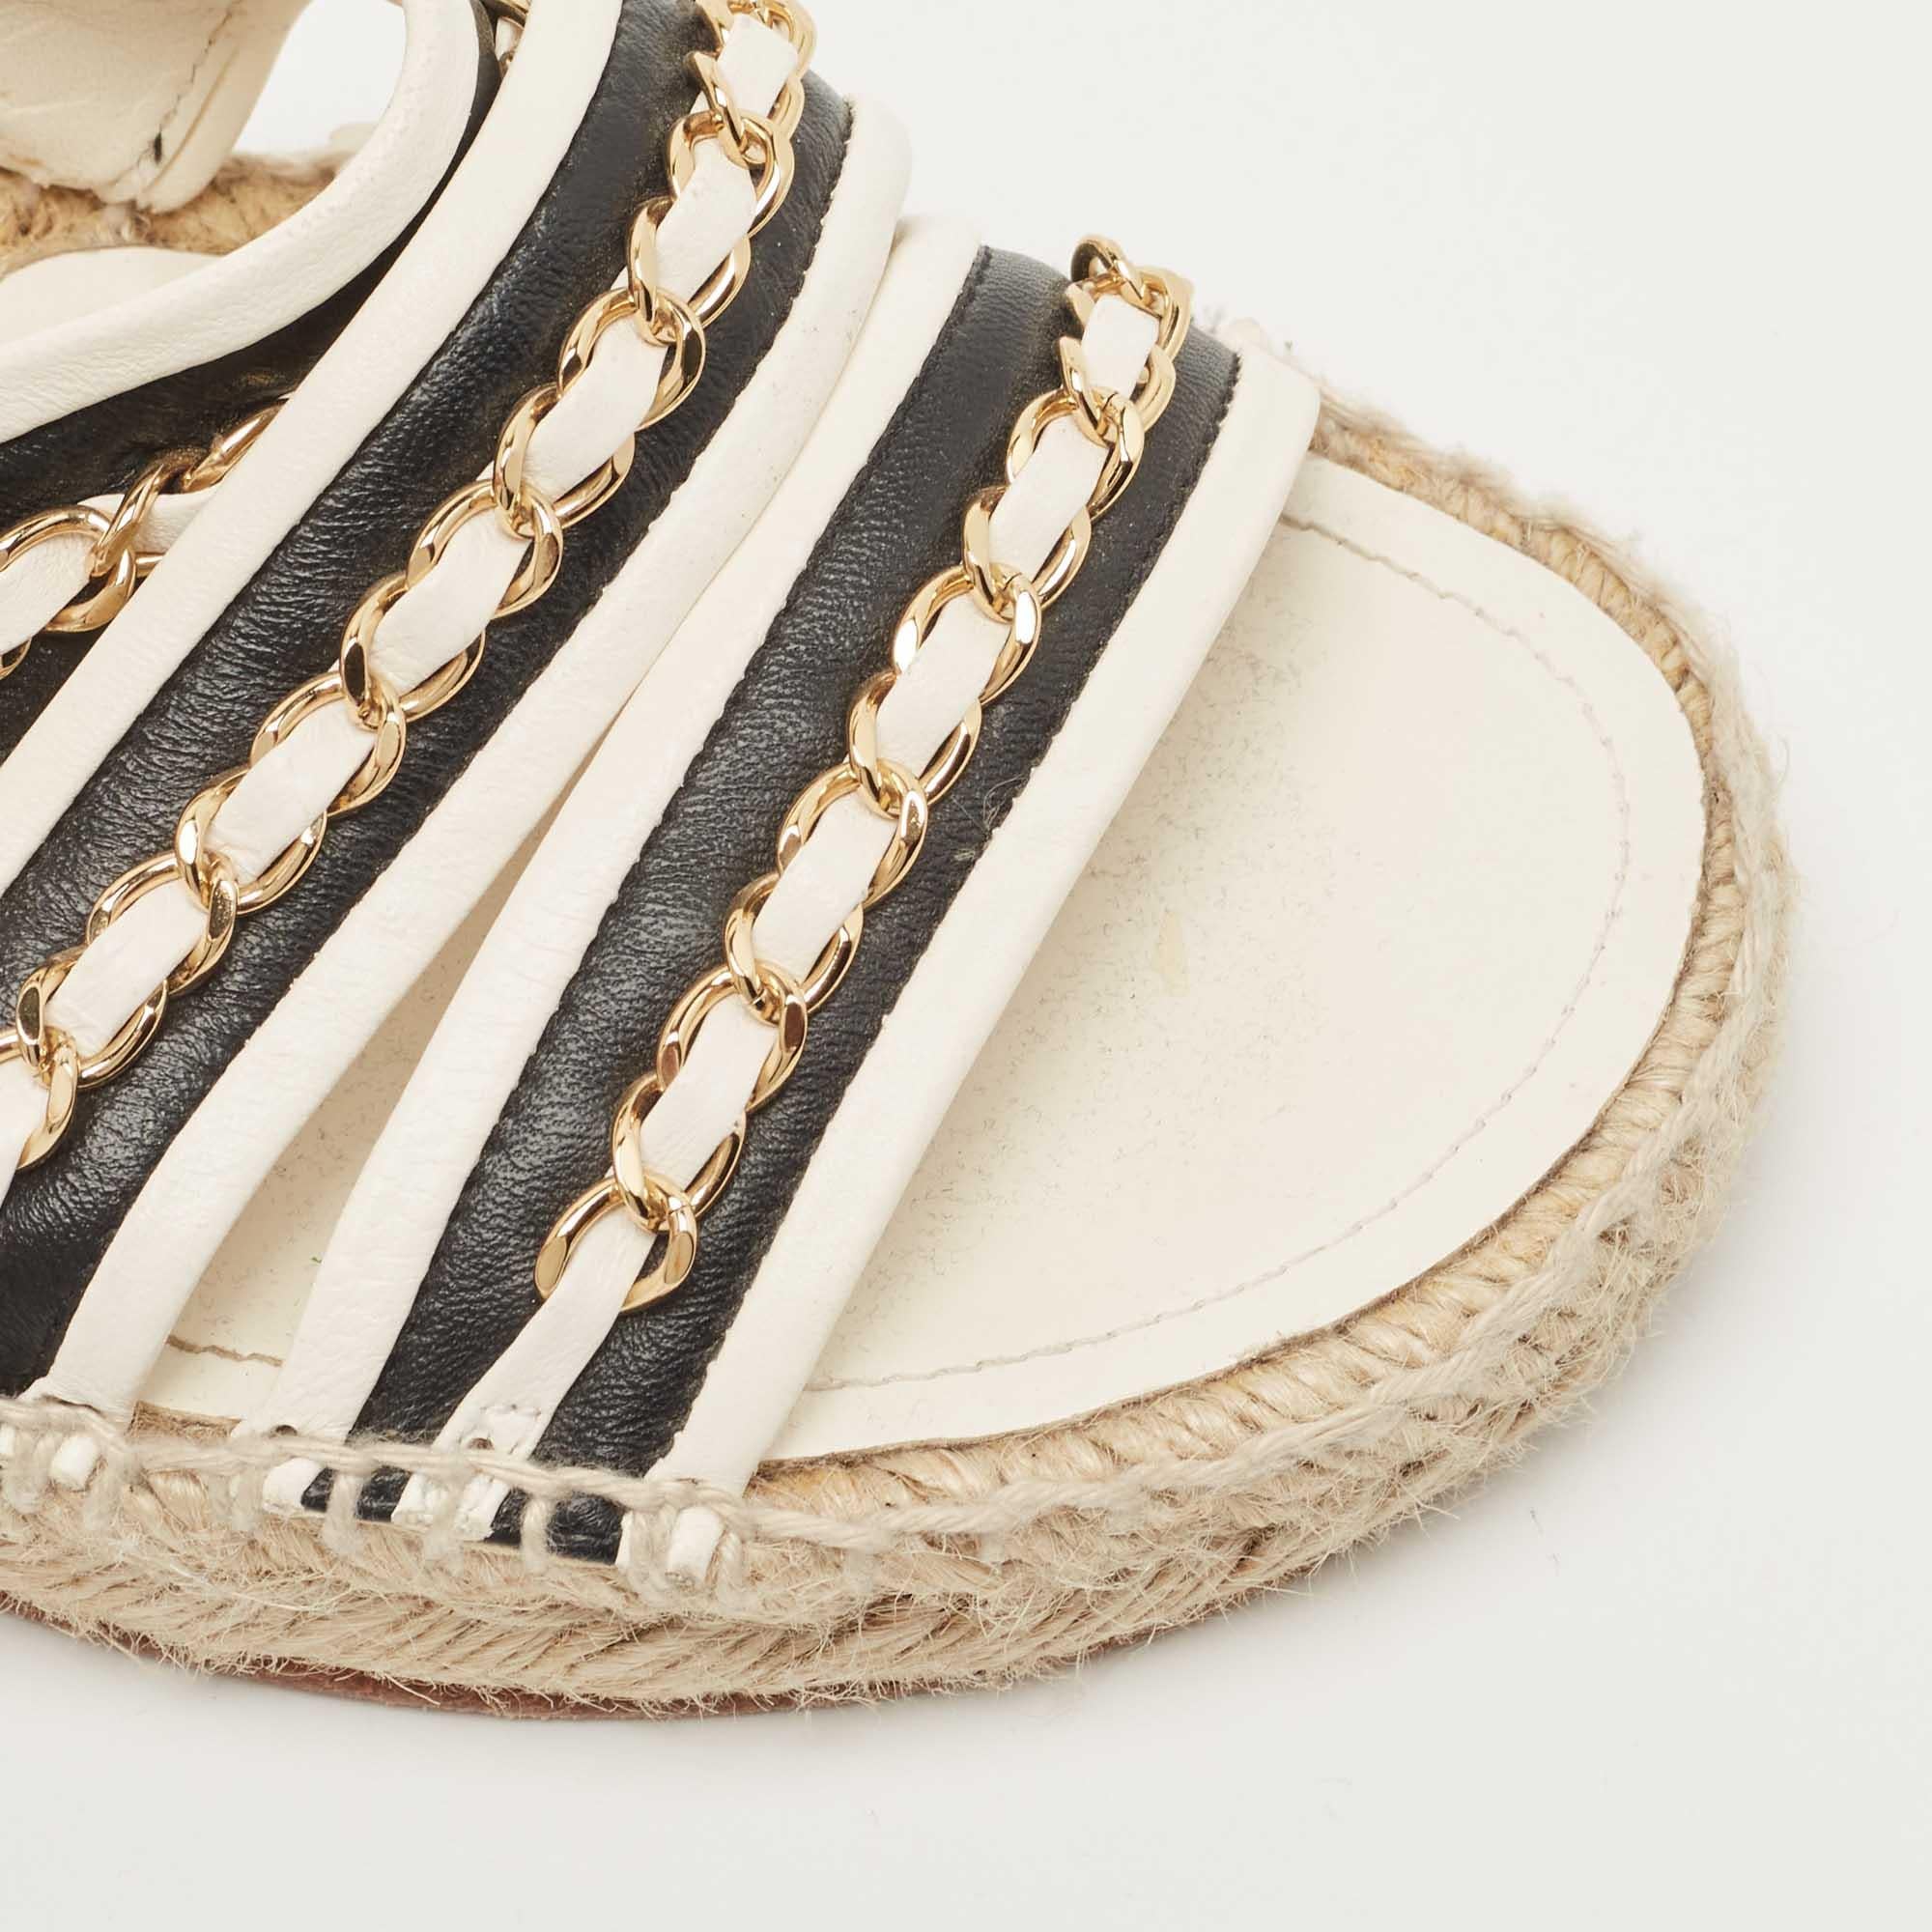 Chanel Black/White Leather Chain-Link Accent Espadrilles  1